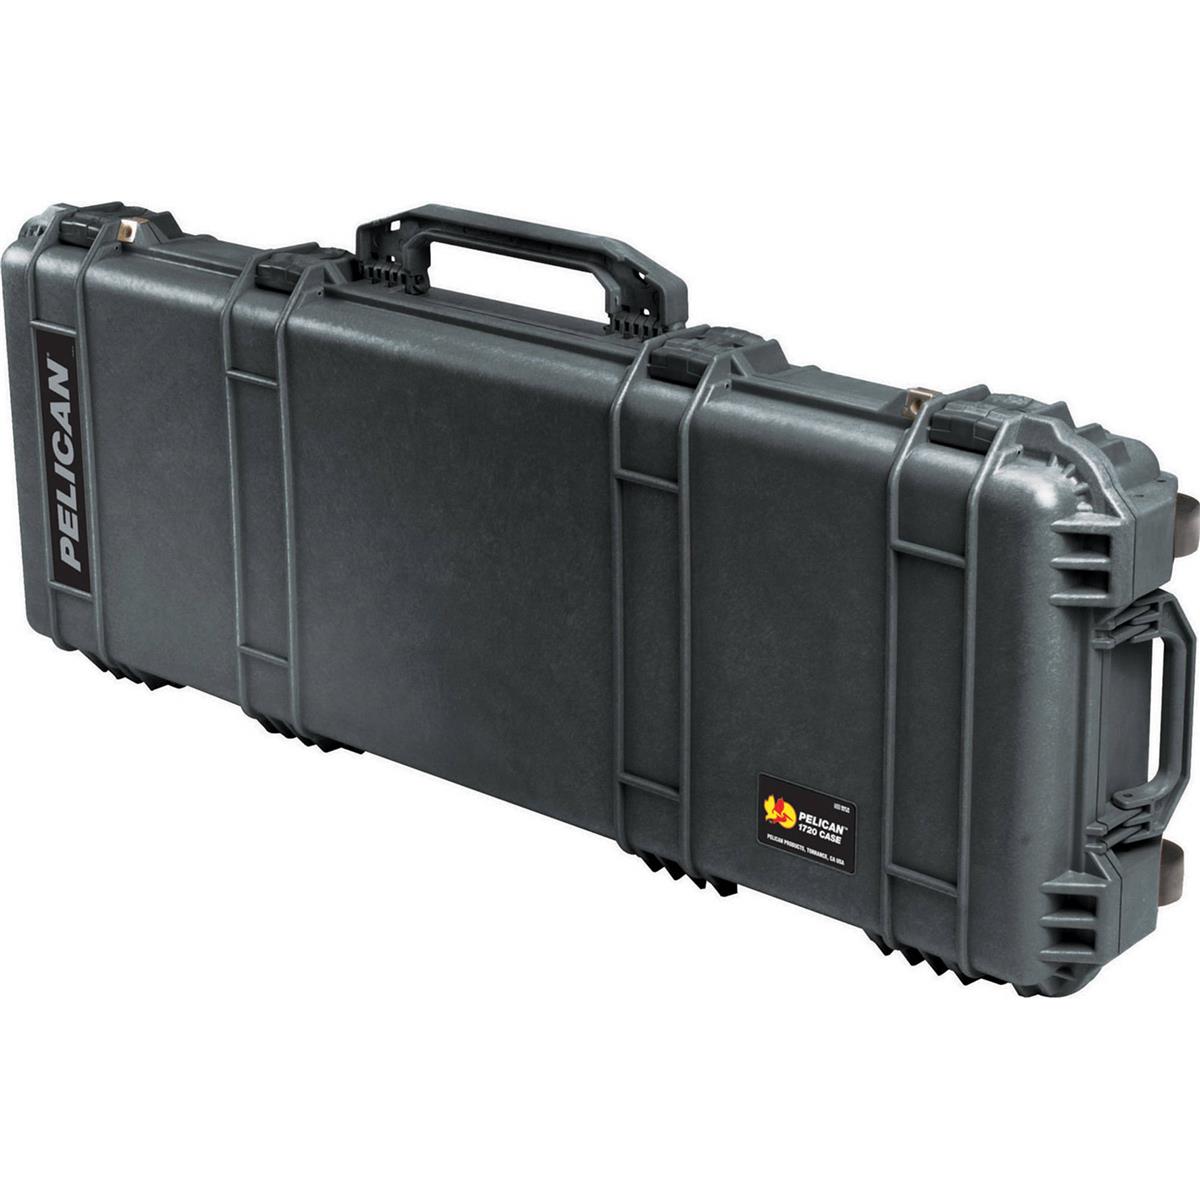 Pelican Protector Black 44in Long Rifle Case with Wheels - Black -  1720-000-110